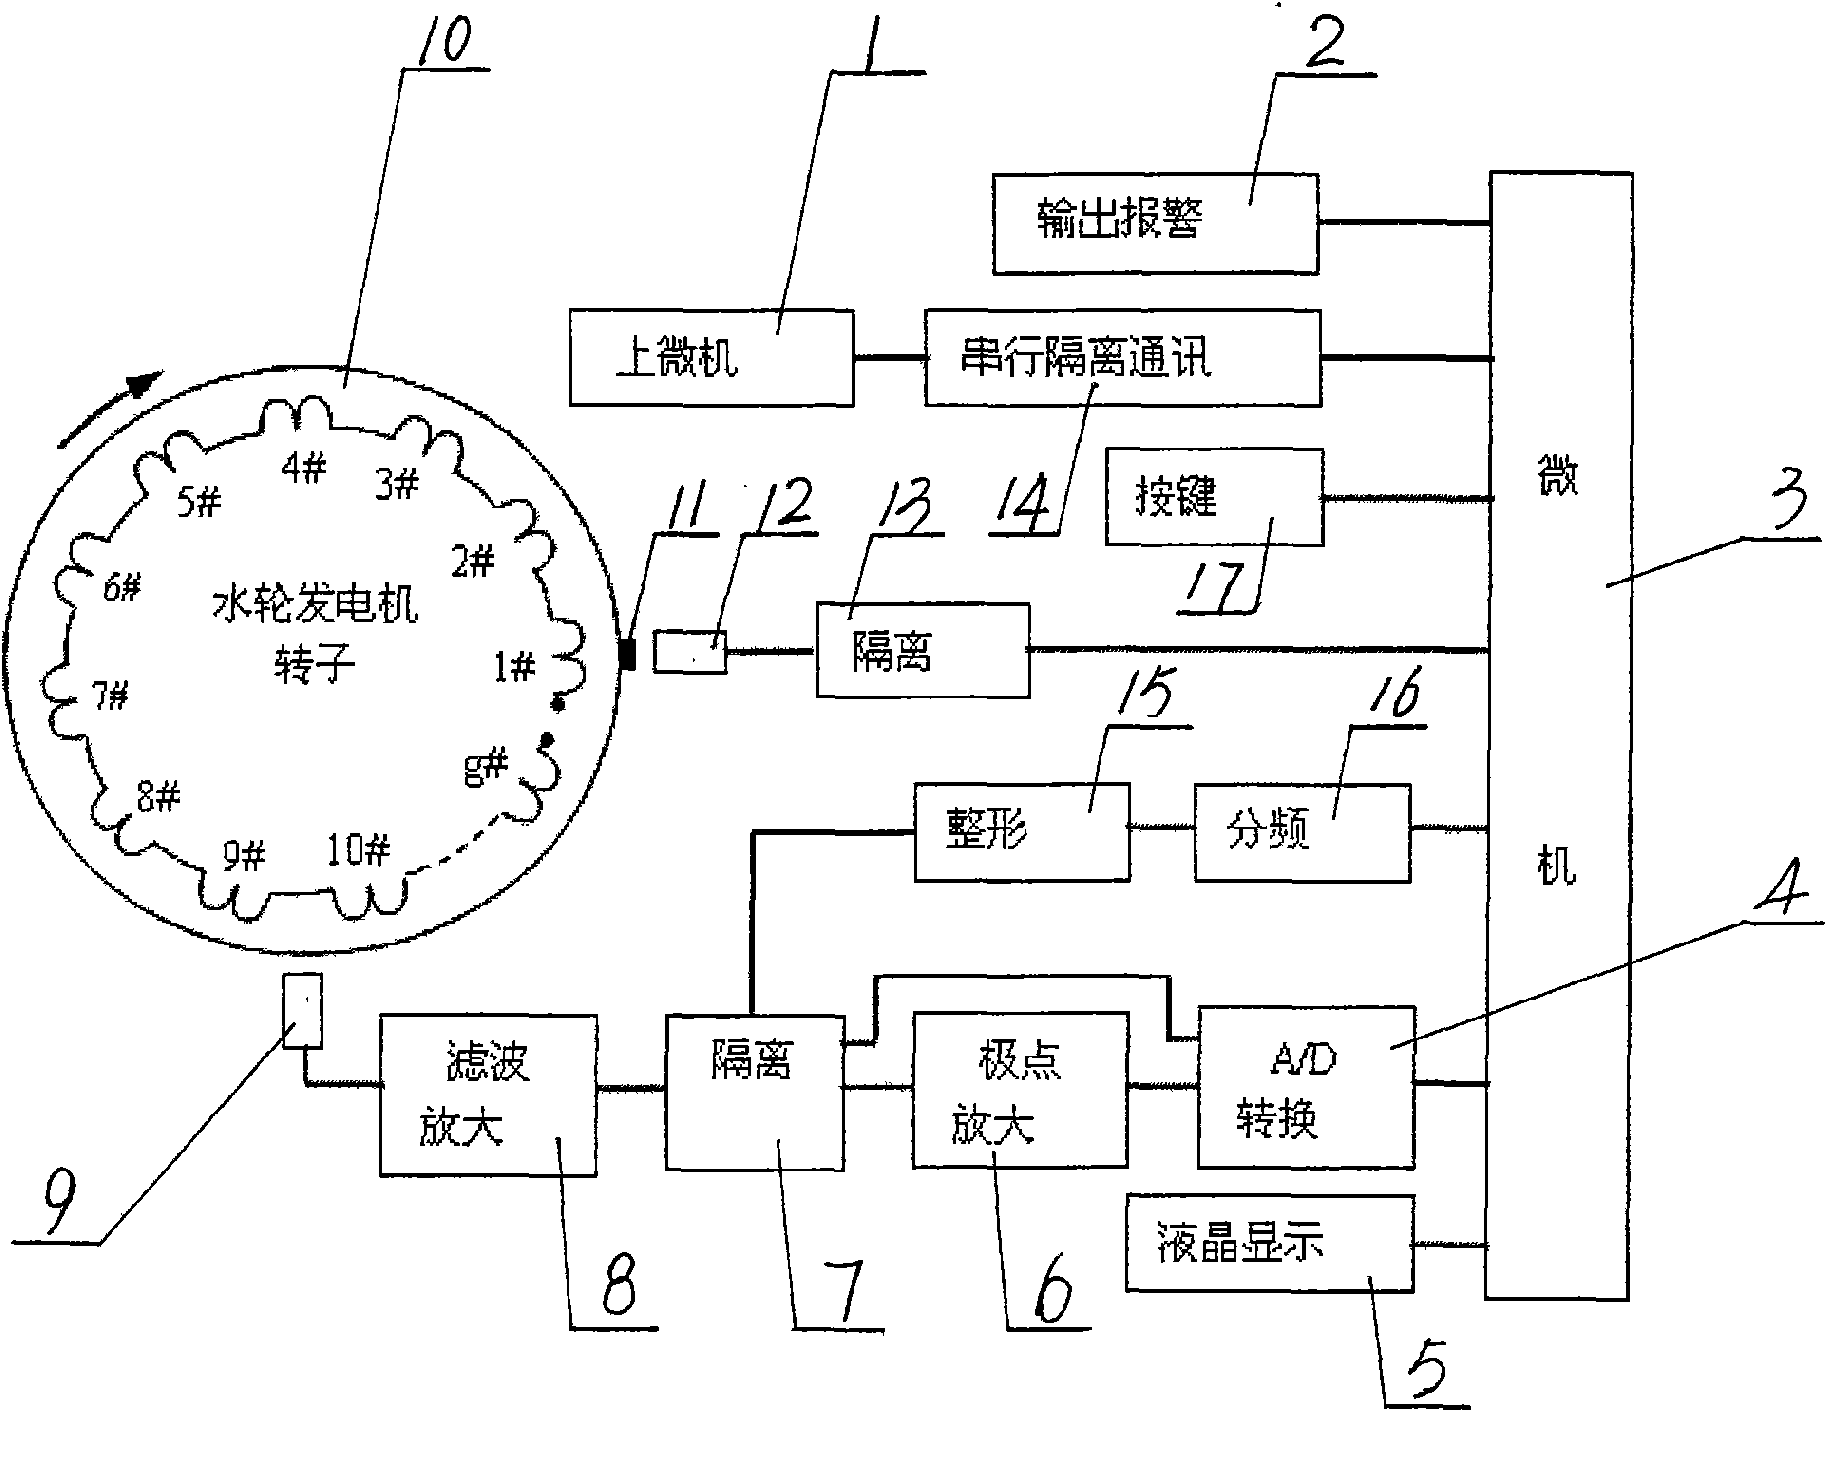 Method and device for online monitoring and positioning turn-to-turn short circuit for rotator of water wheel generator